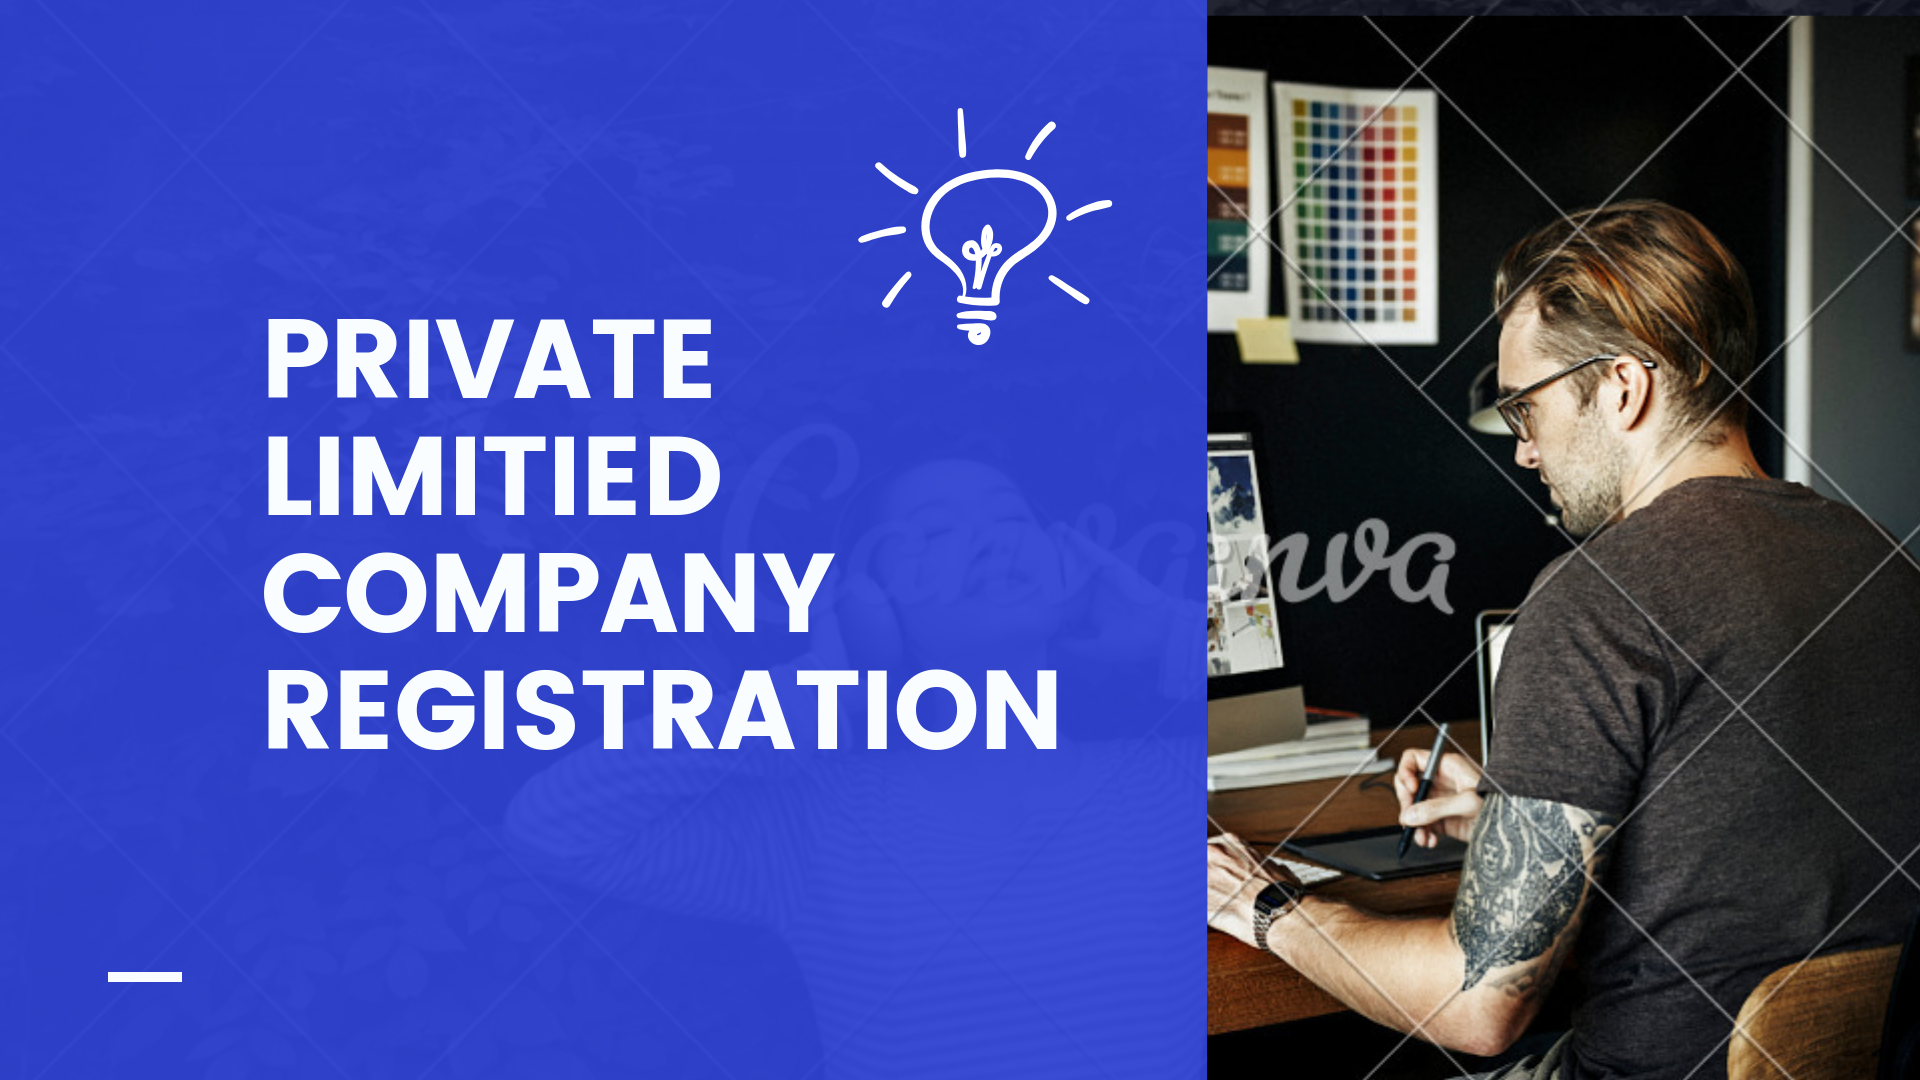 Essential private limited company registration